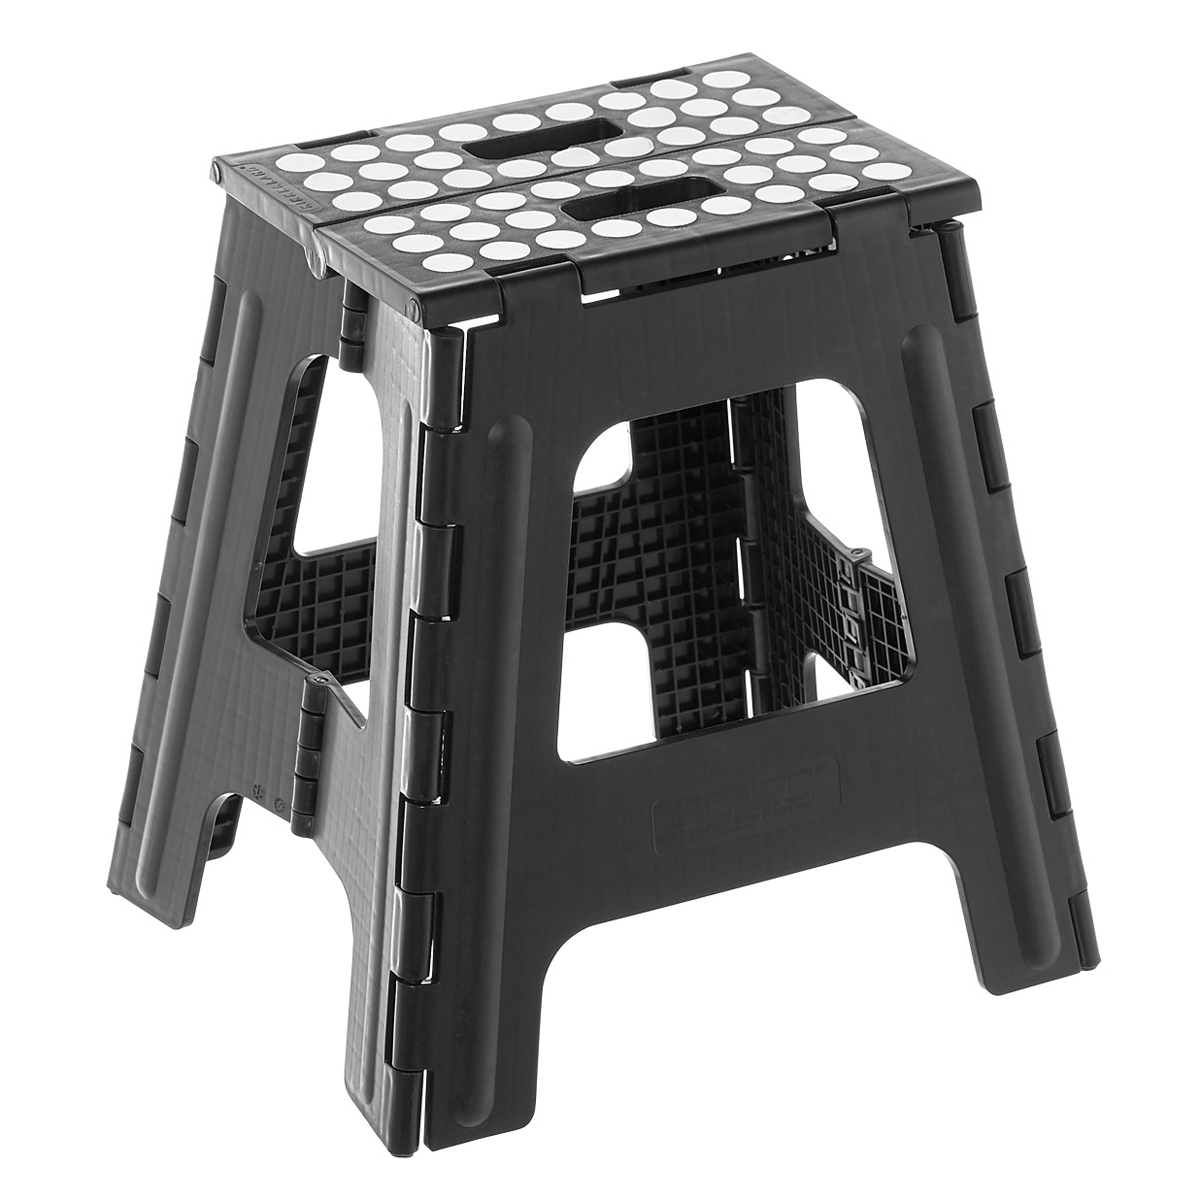 NEW HEAVY DUTY EASY FOLD AWAY STURDY LARGE FOLDING PLASTIC STEP STOOL FOR HOME 